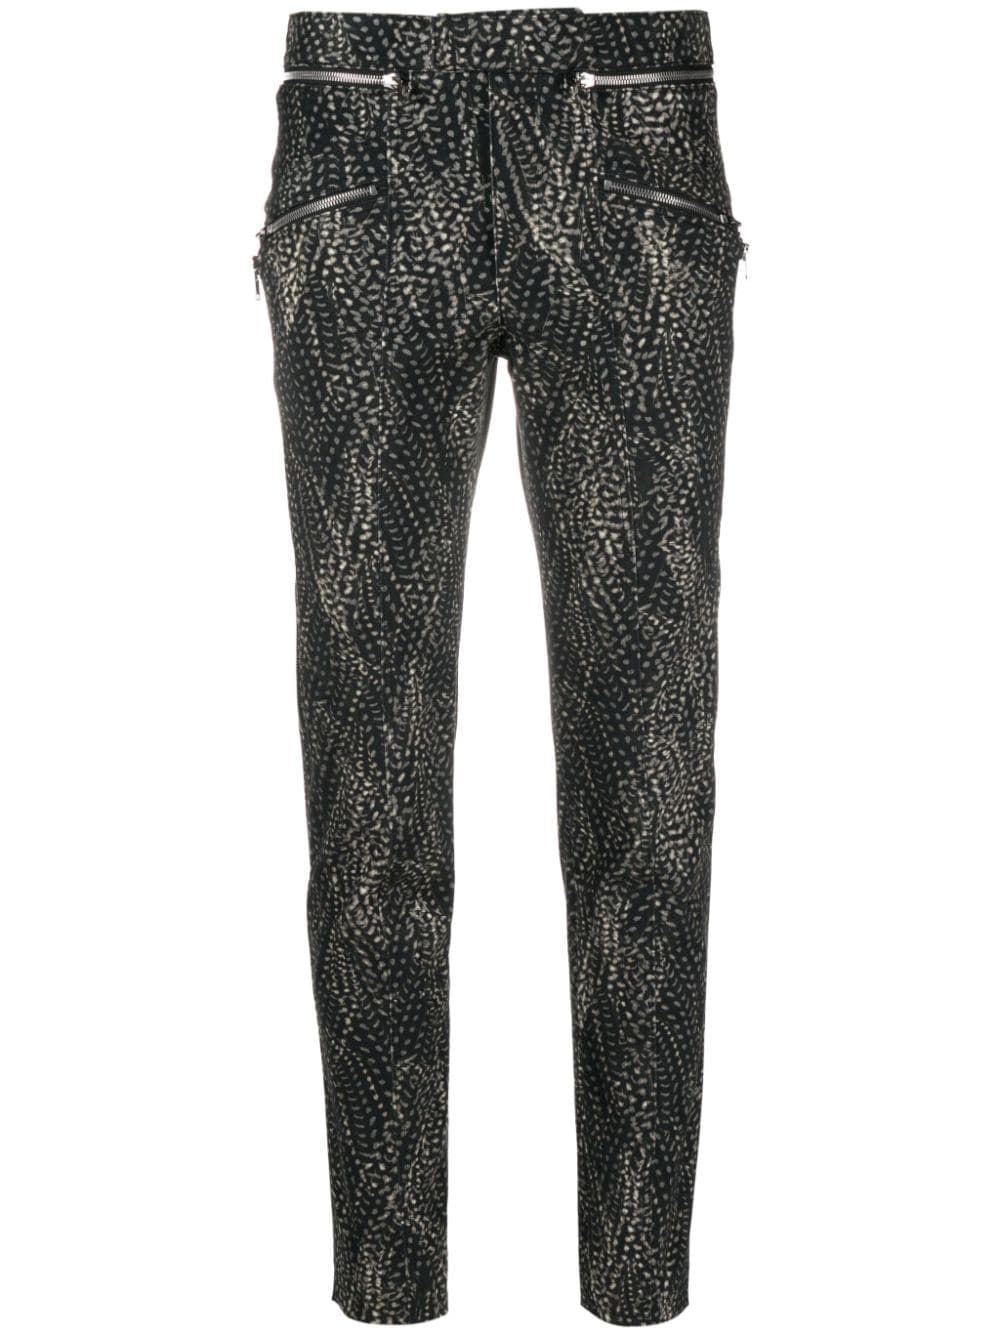 Stylish Faded Black Pants for Women, Perfect for FW23